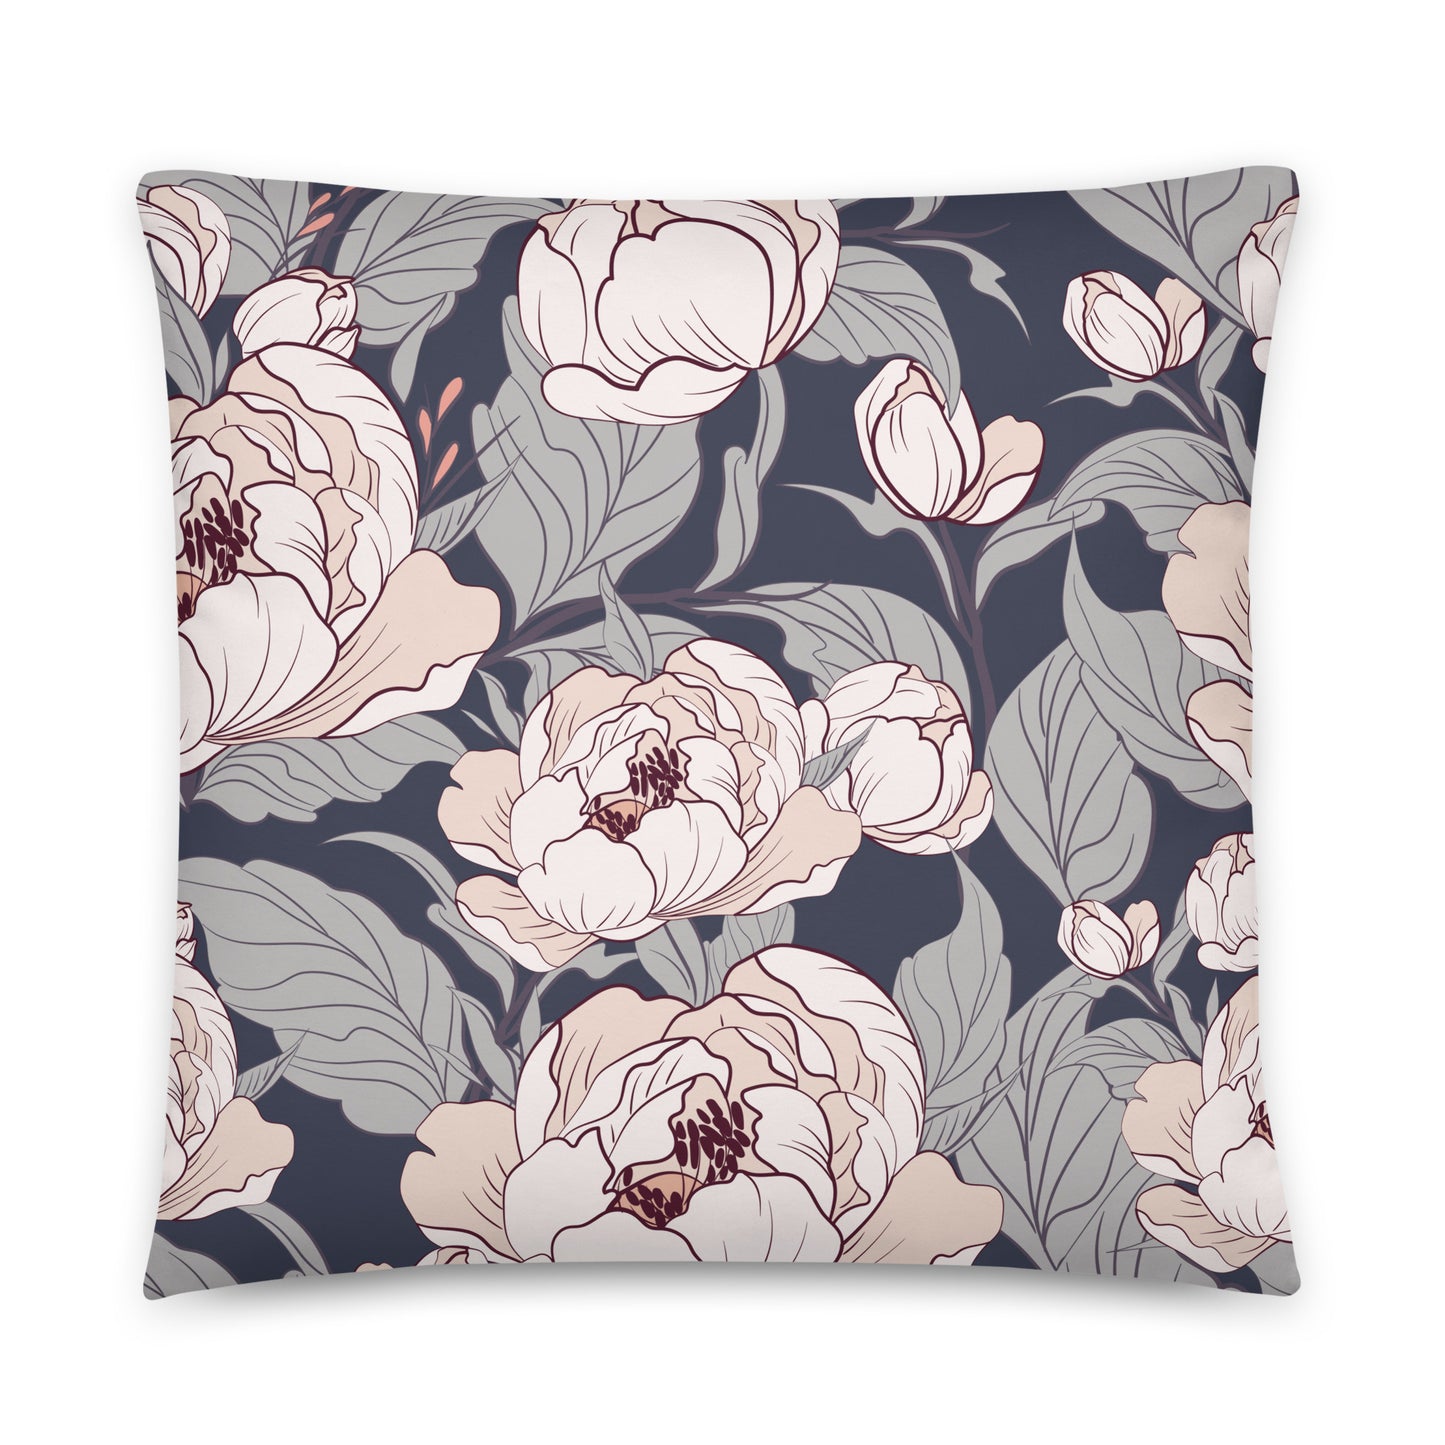 Flower Painting - Sustainably Made Pillows